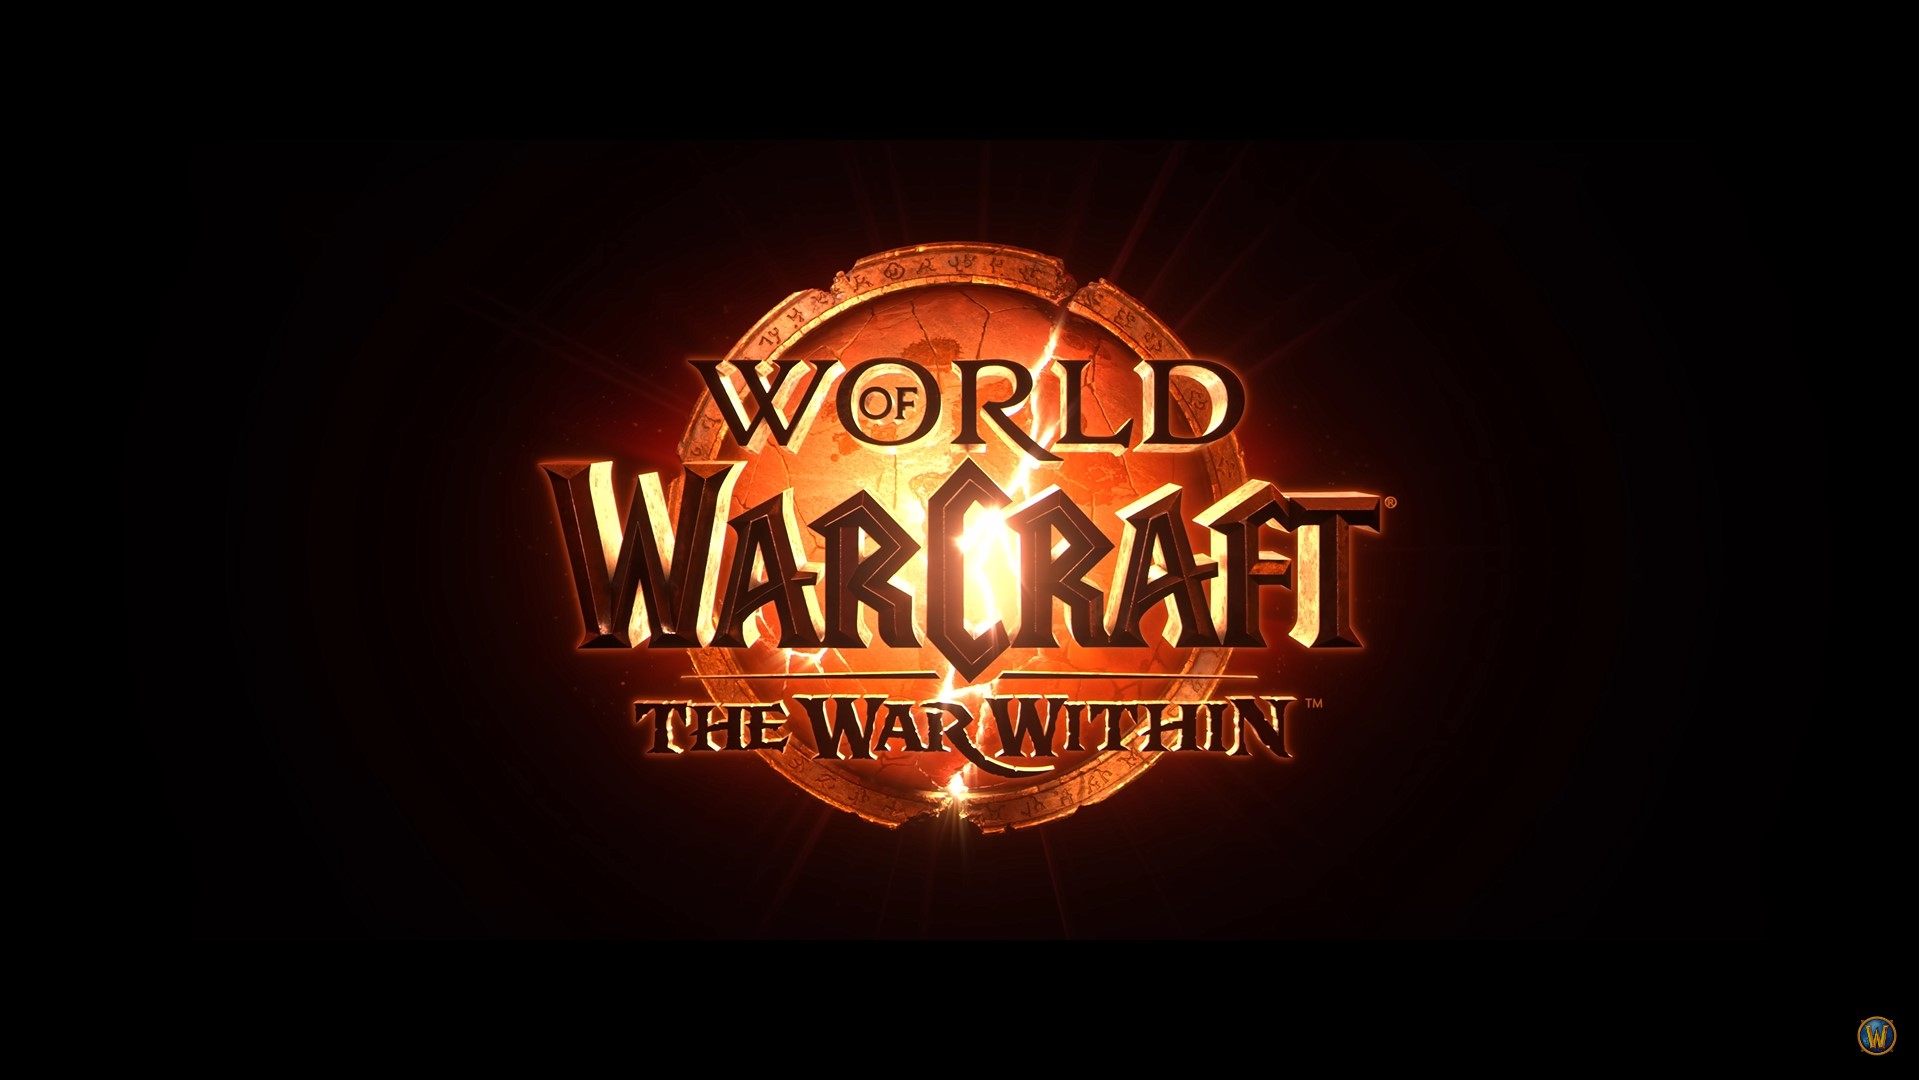 World of Warcraft The War Within expansion revealed